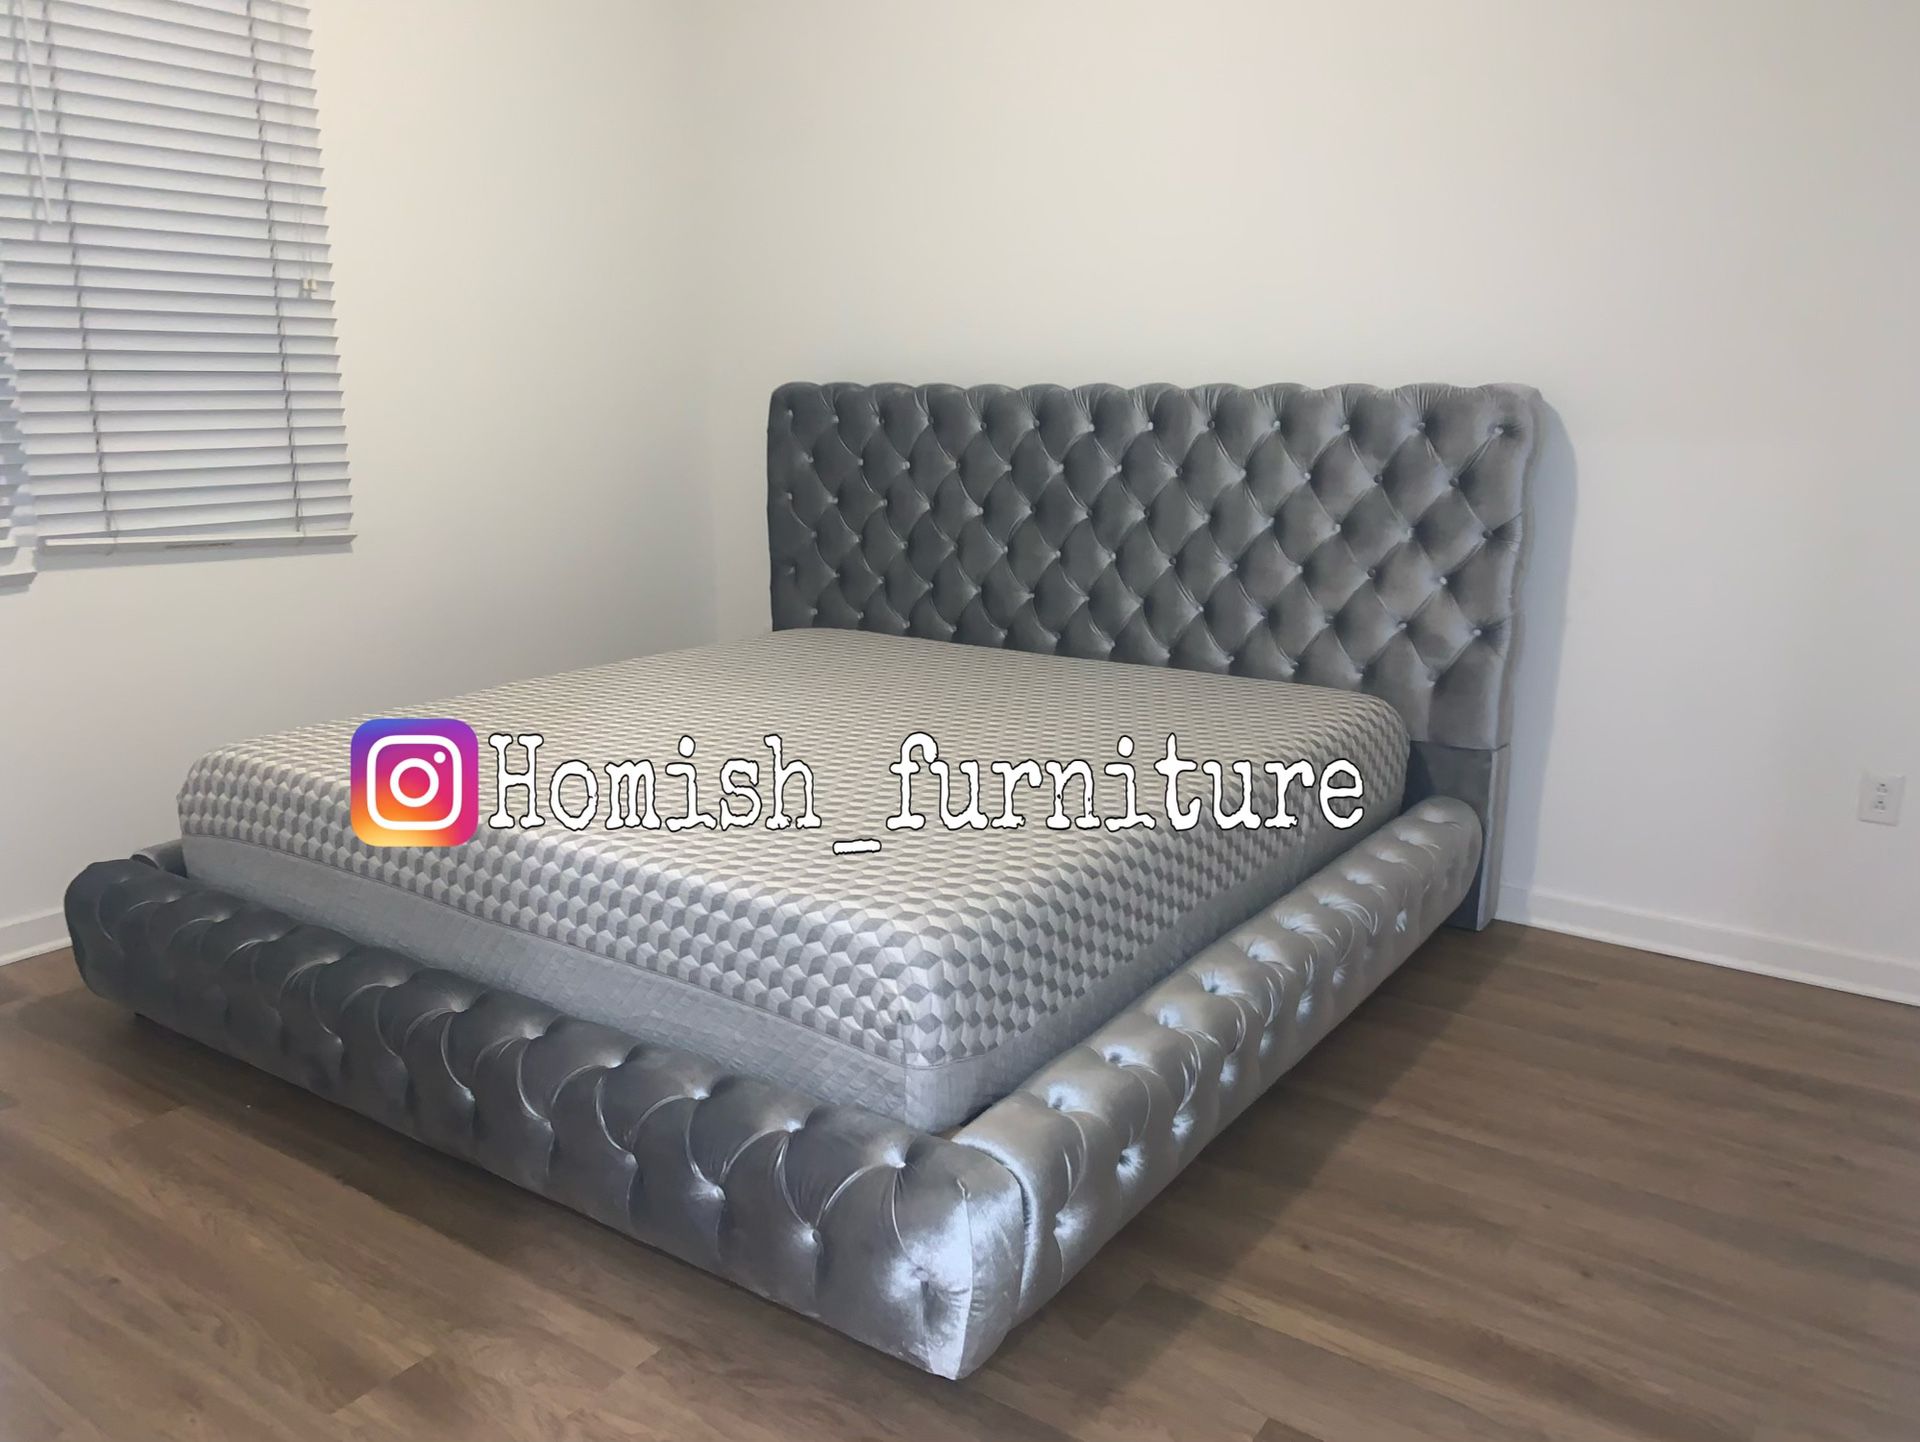 $699 Brand New King Bed Frame With Mattress (read description)